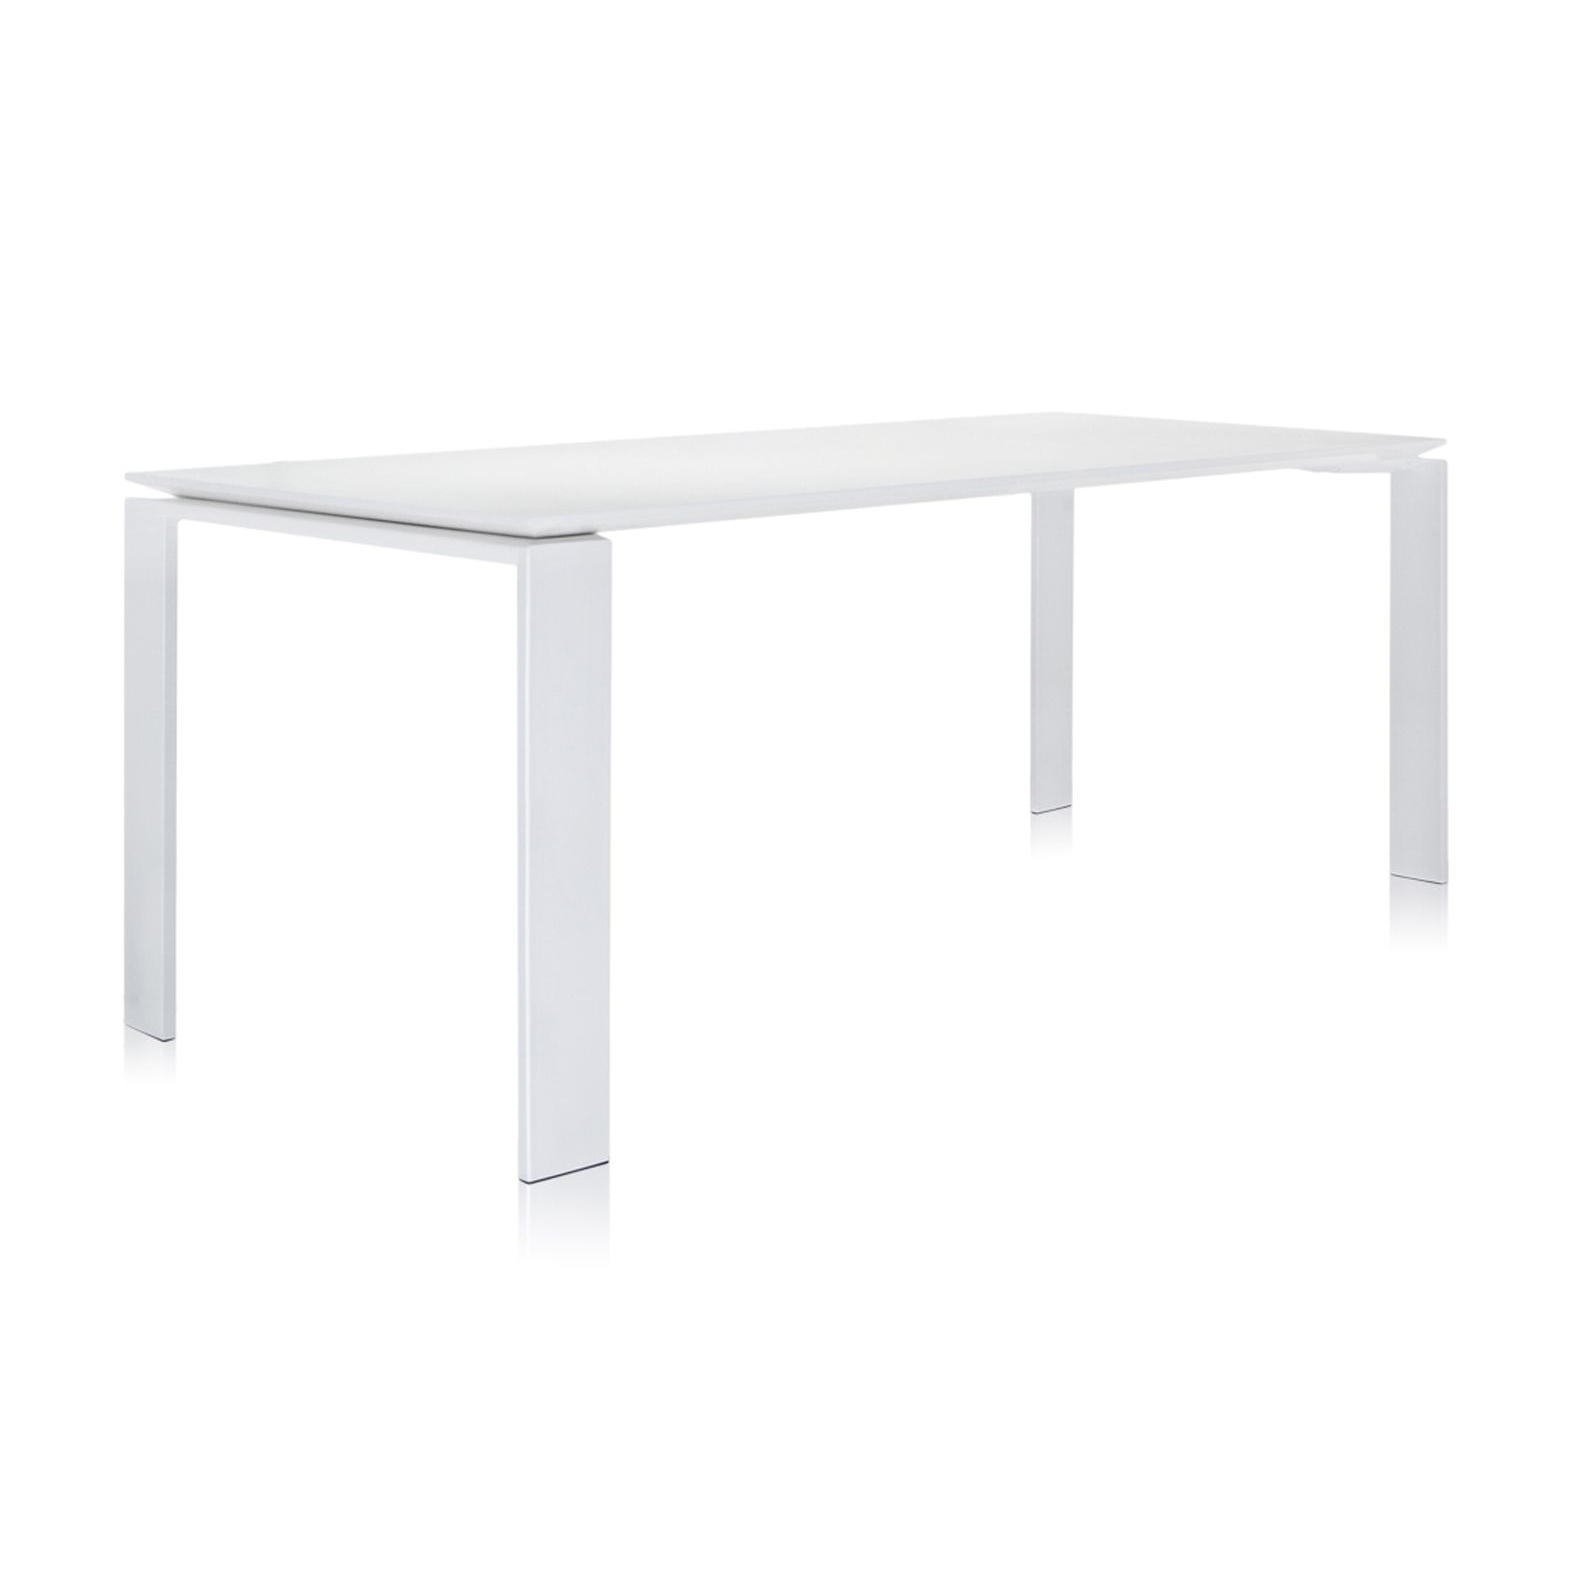 FOUR outdoor table